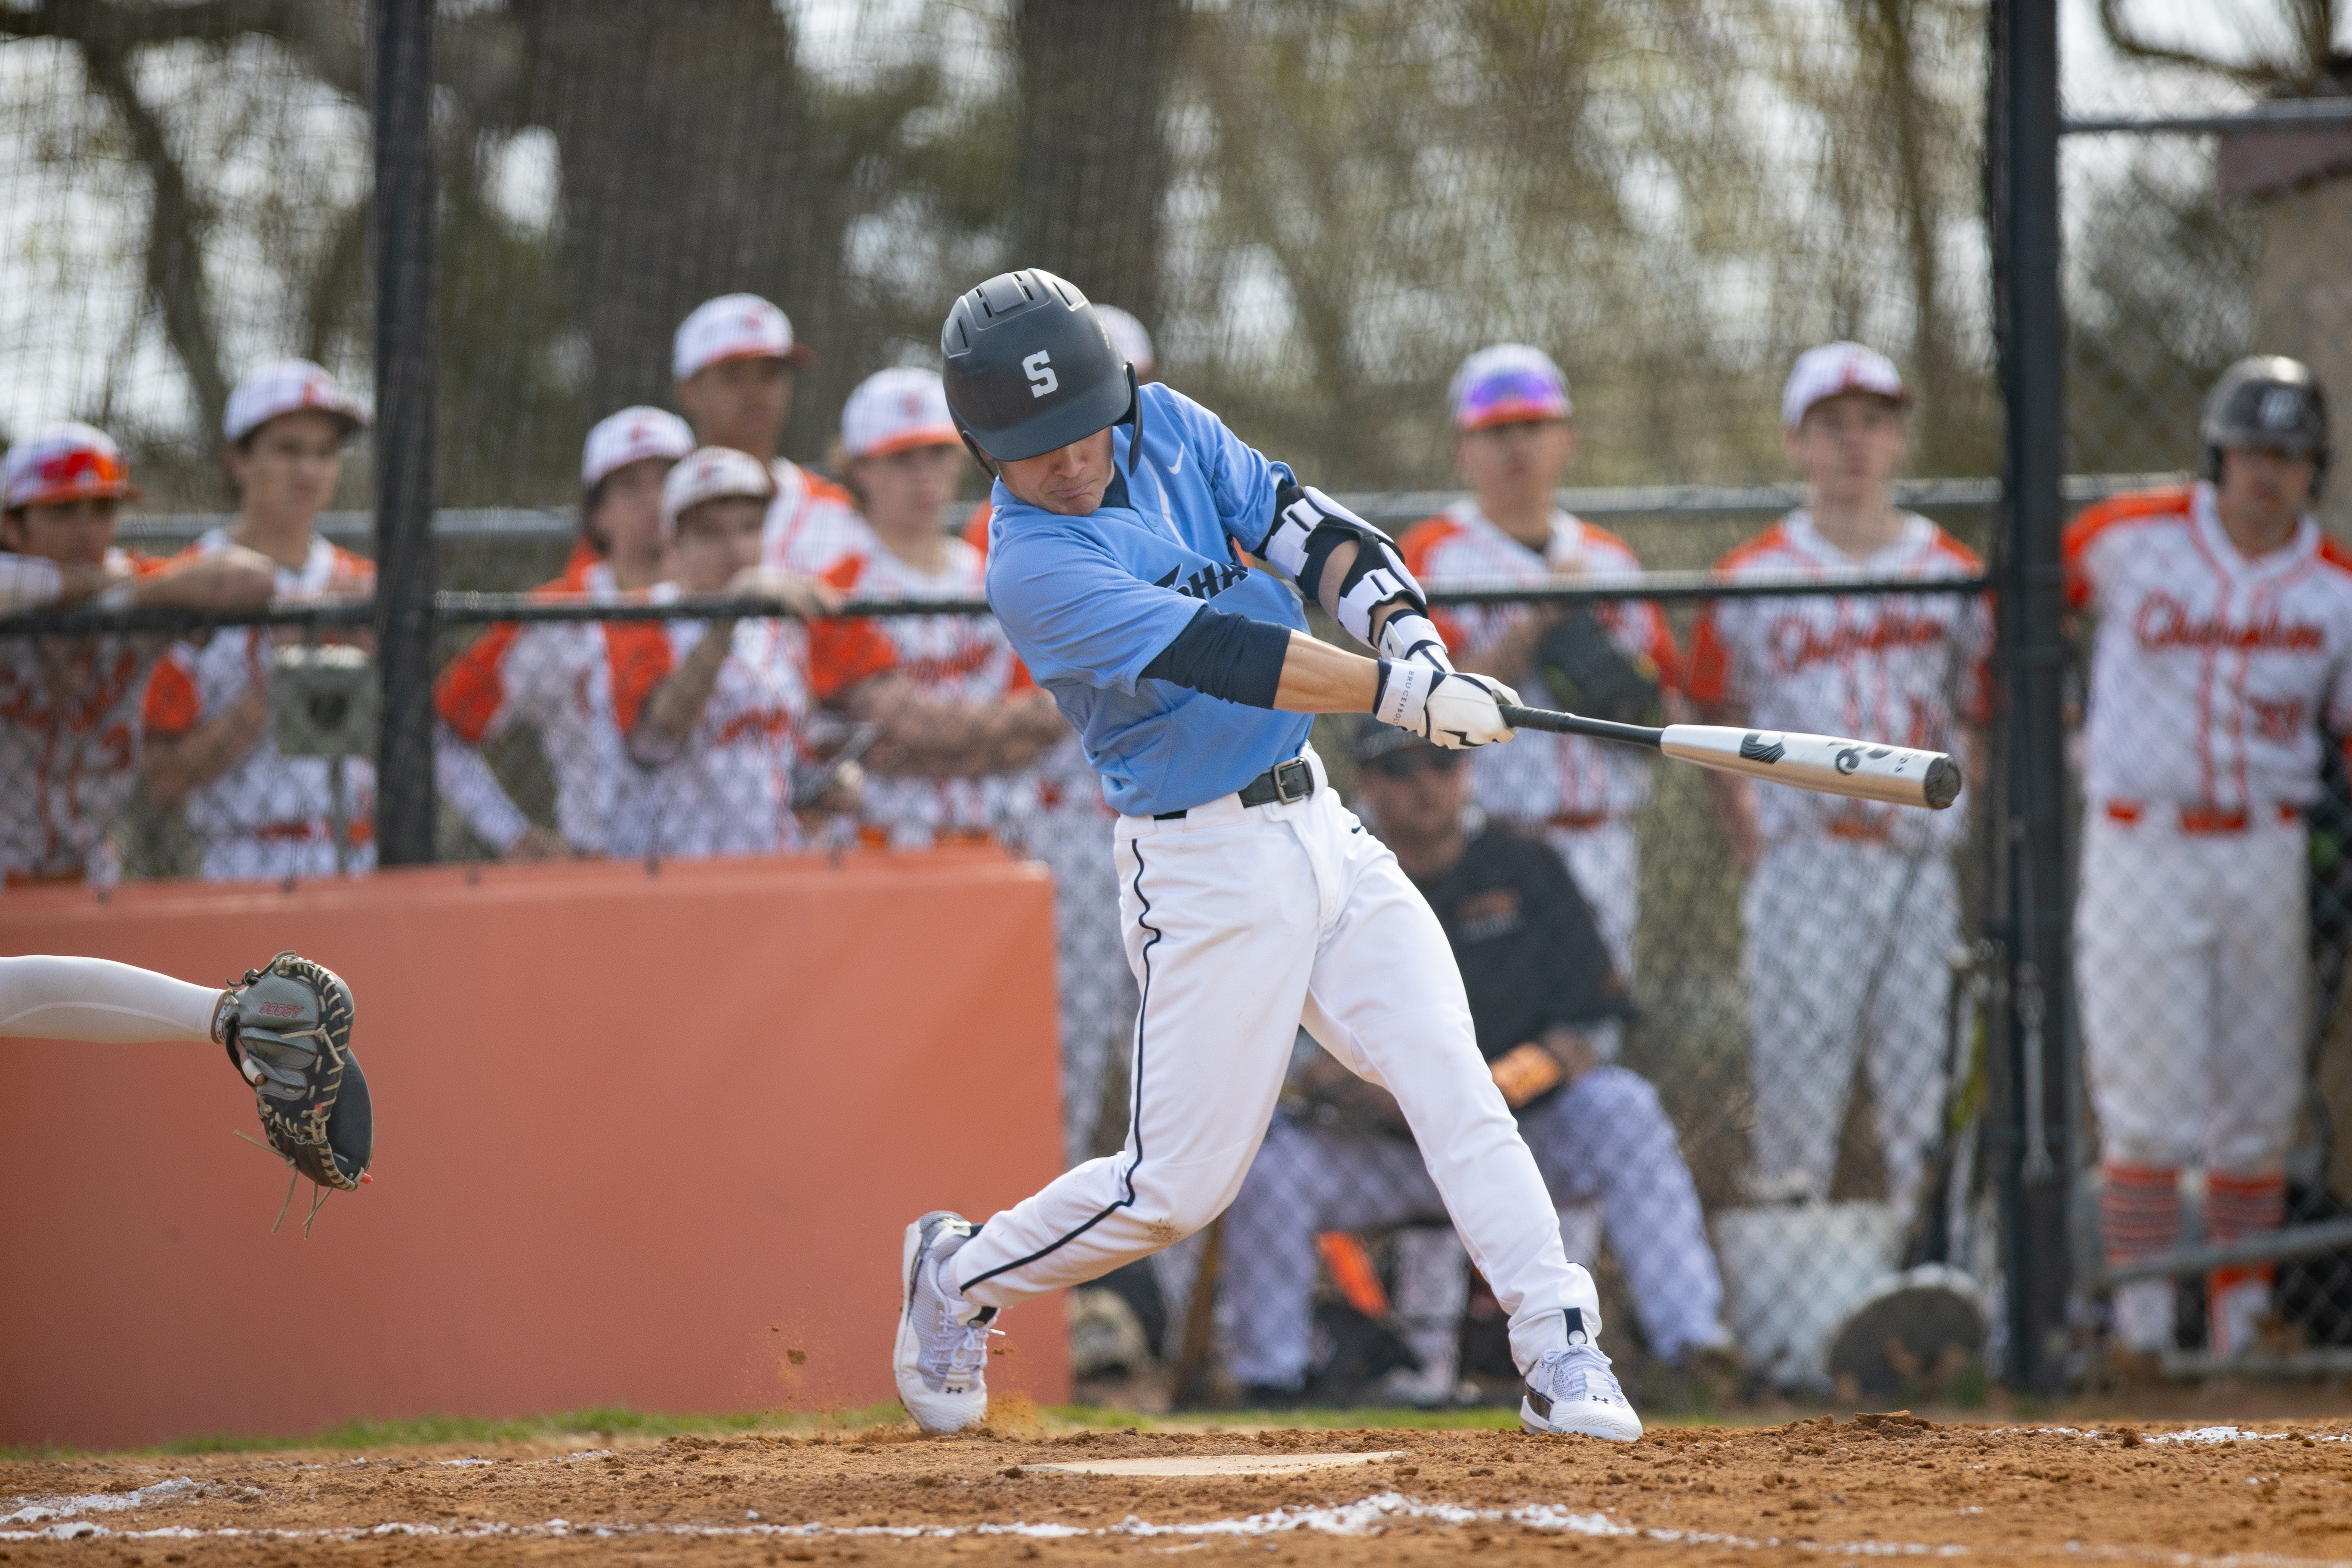 Ben Hudson (4) of Shawnee, connects with the ball for a home run in Marlton, NJ on Monday, April 3, 2023.